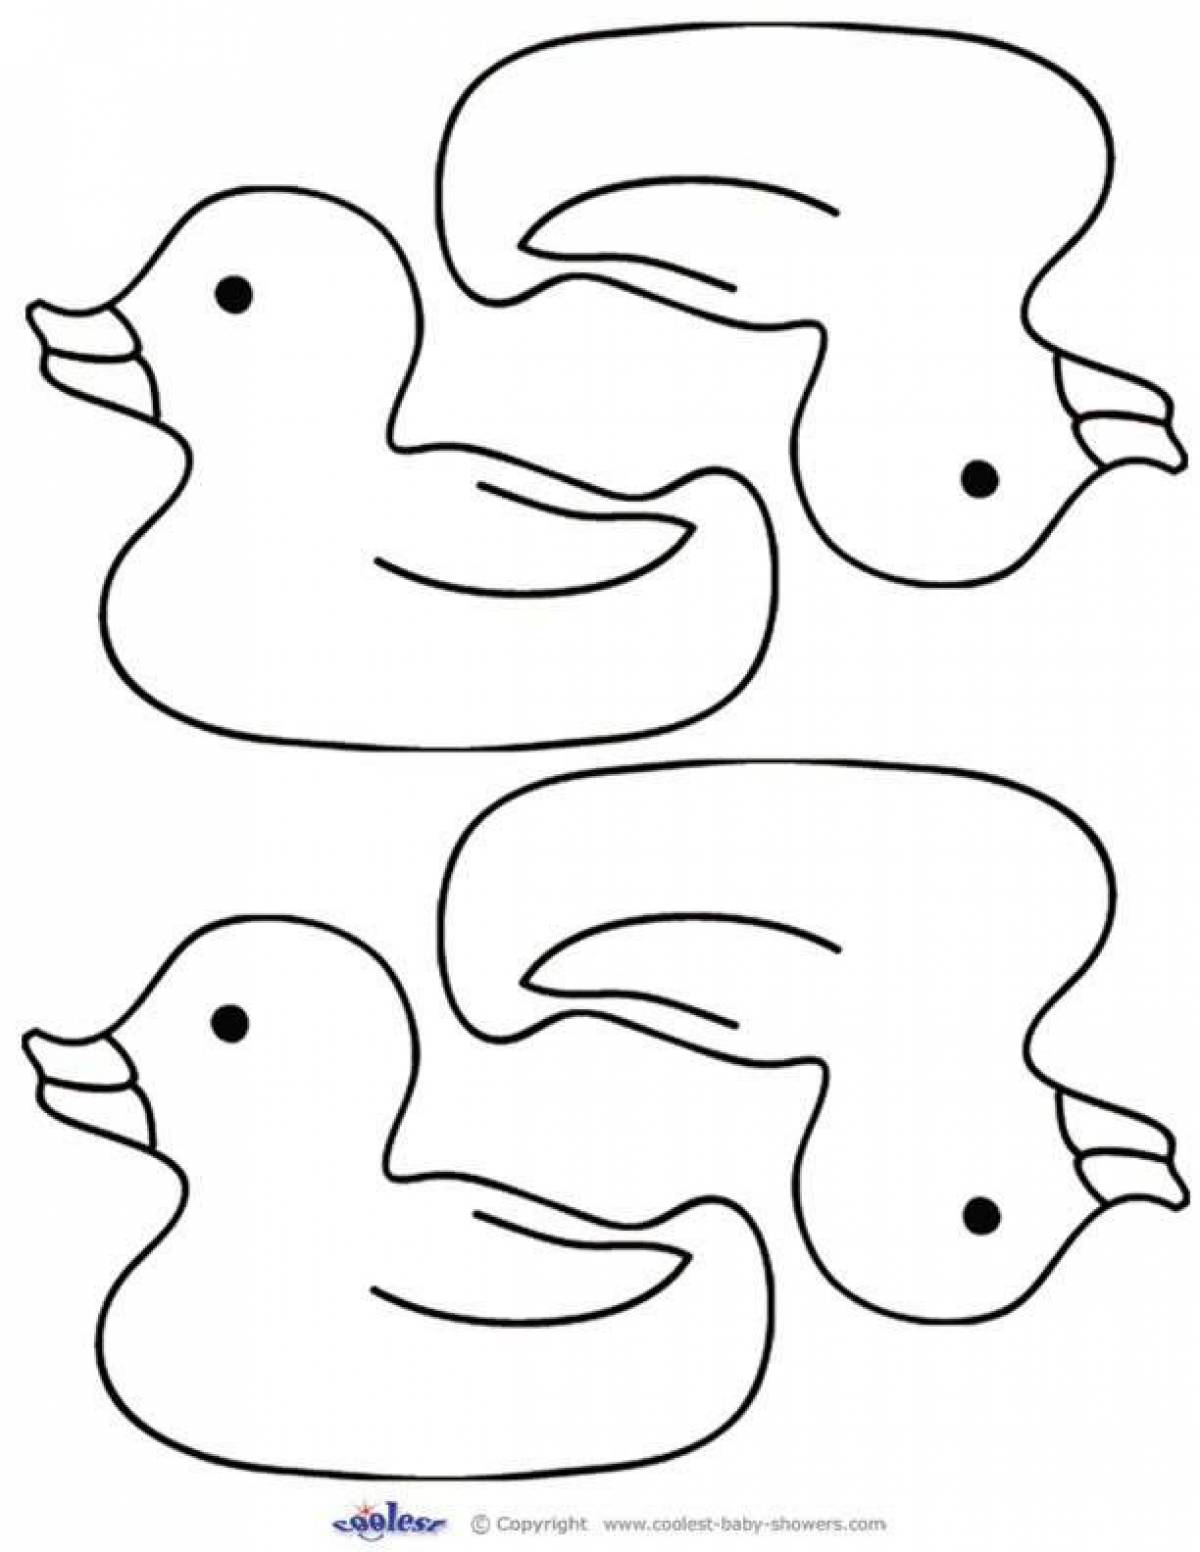 Coloring page graceful Dymkovo duck